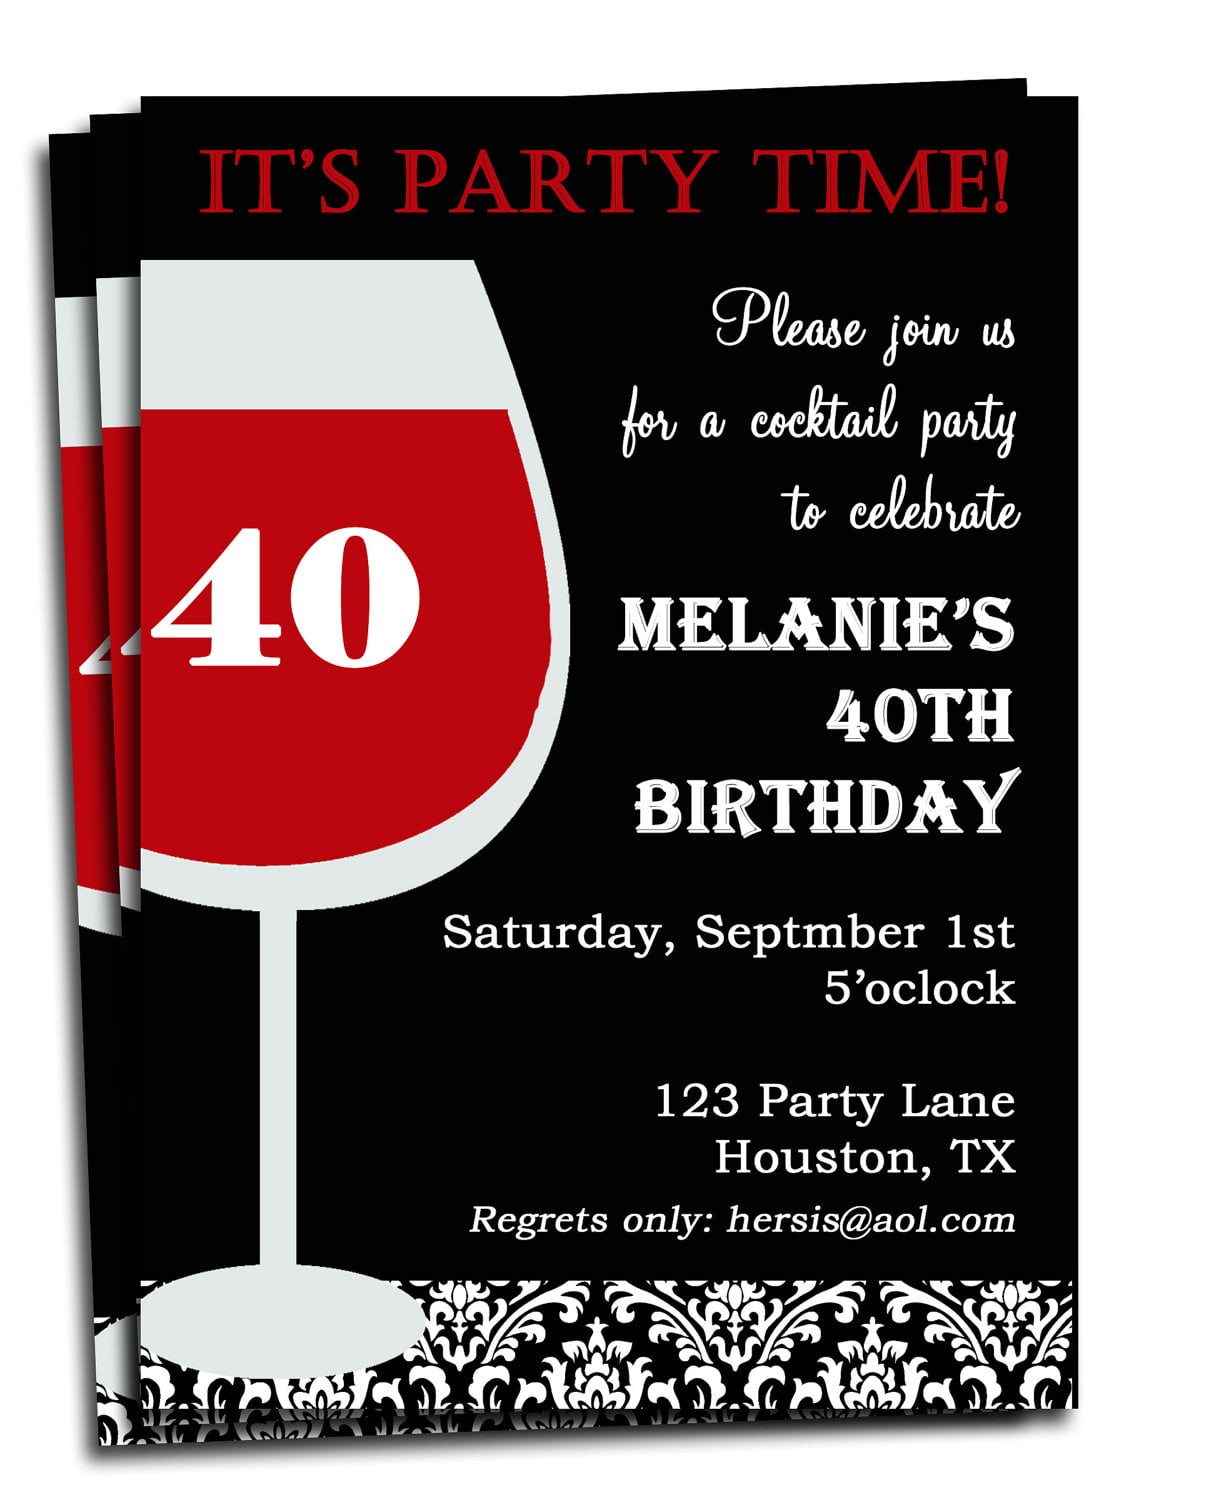 FREE Printable Personalized Birthday Invitations For Adults Download